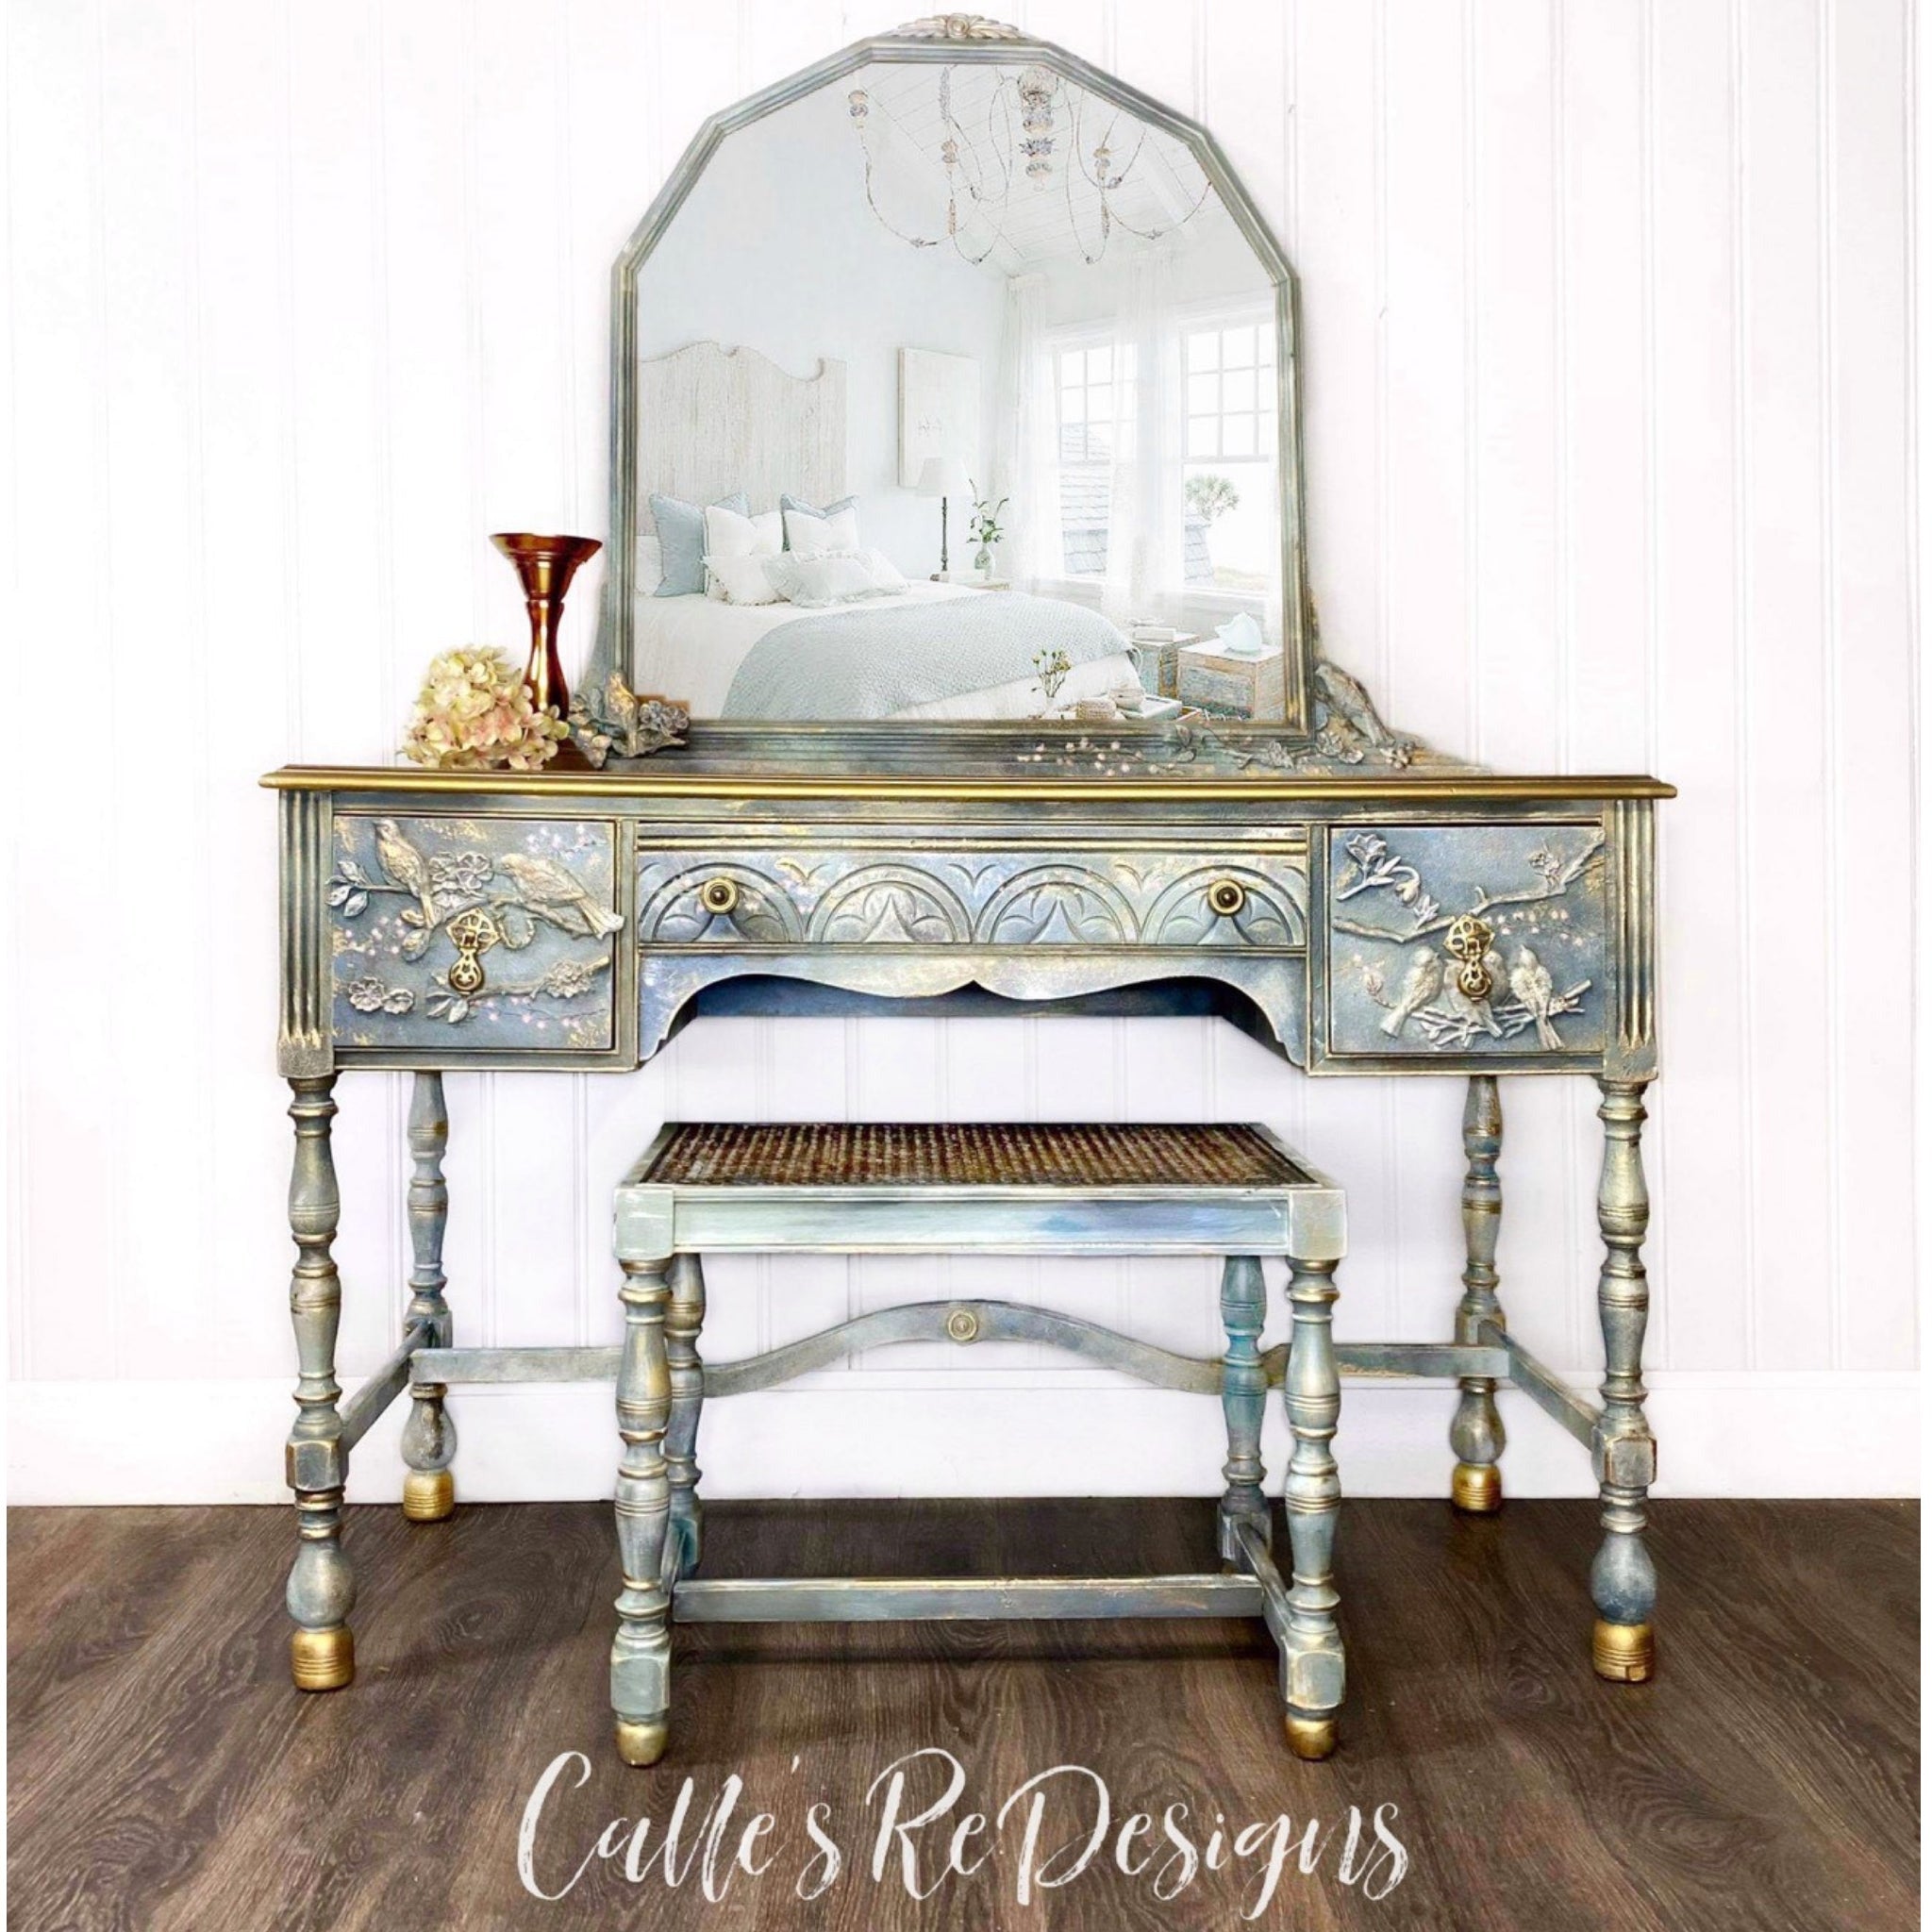 A vintage vanity refurbished by Calle's ReDesigns is painted light blue with gold accents and features the Avian Love silicone mould on it.